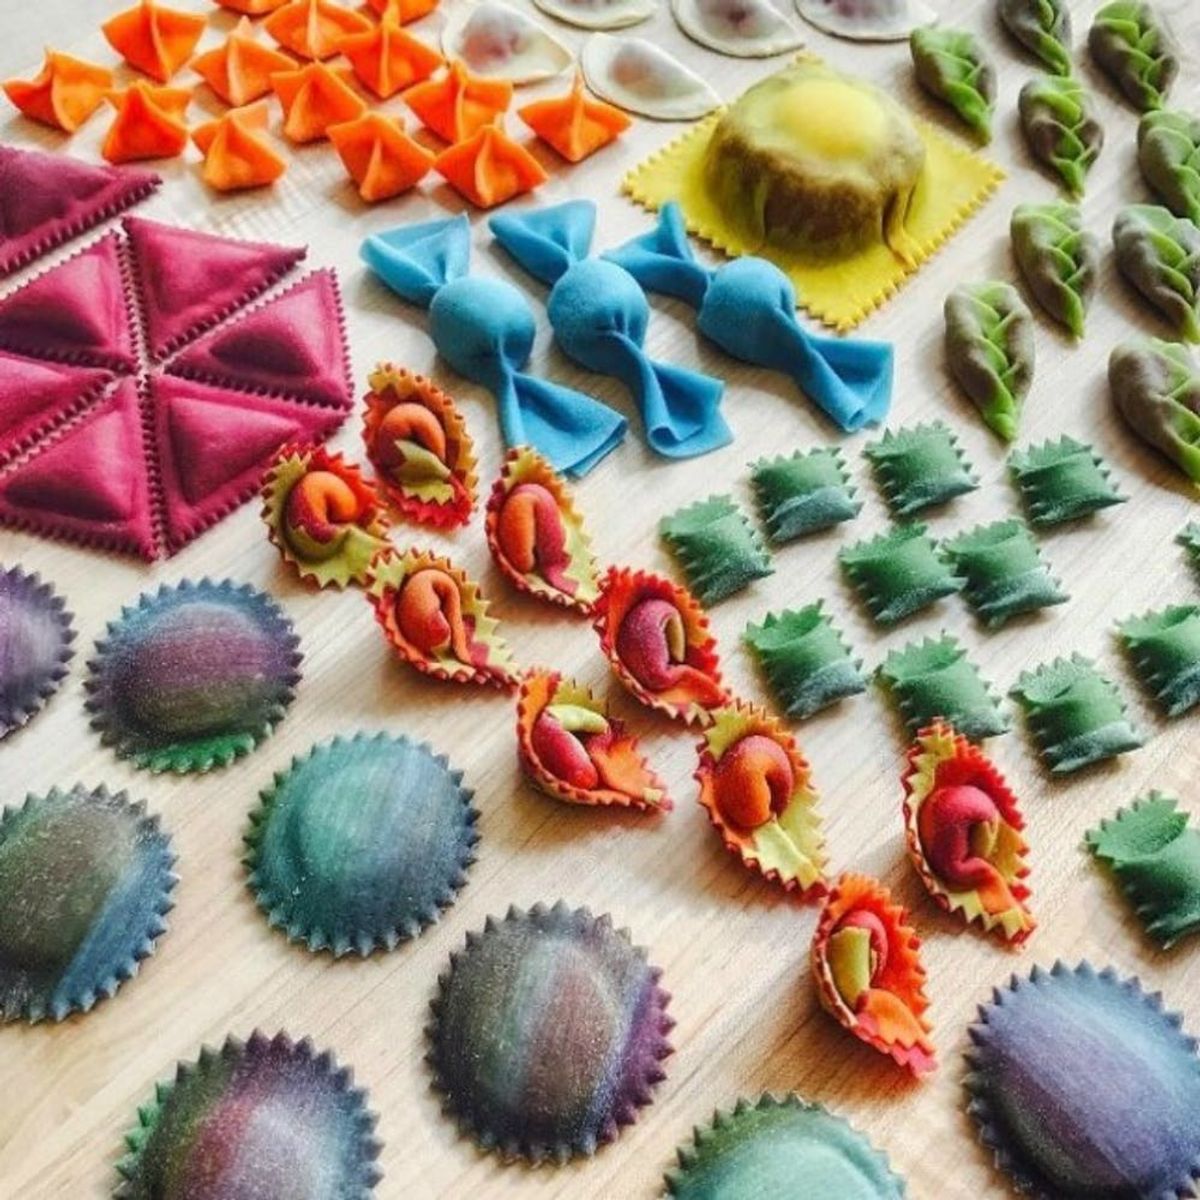 This Rainbow Pasta Instagram Feed Will Brighten Your Day